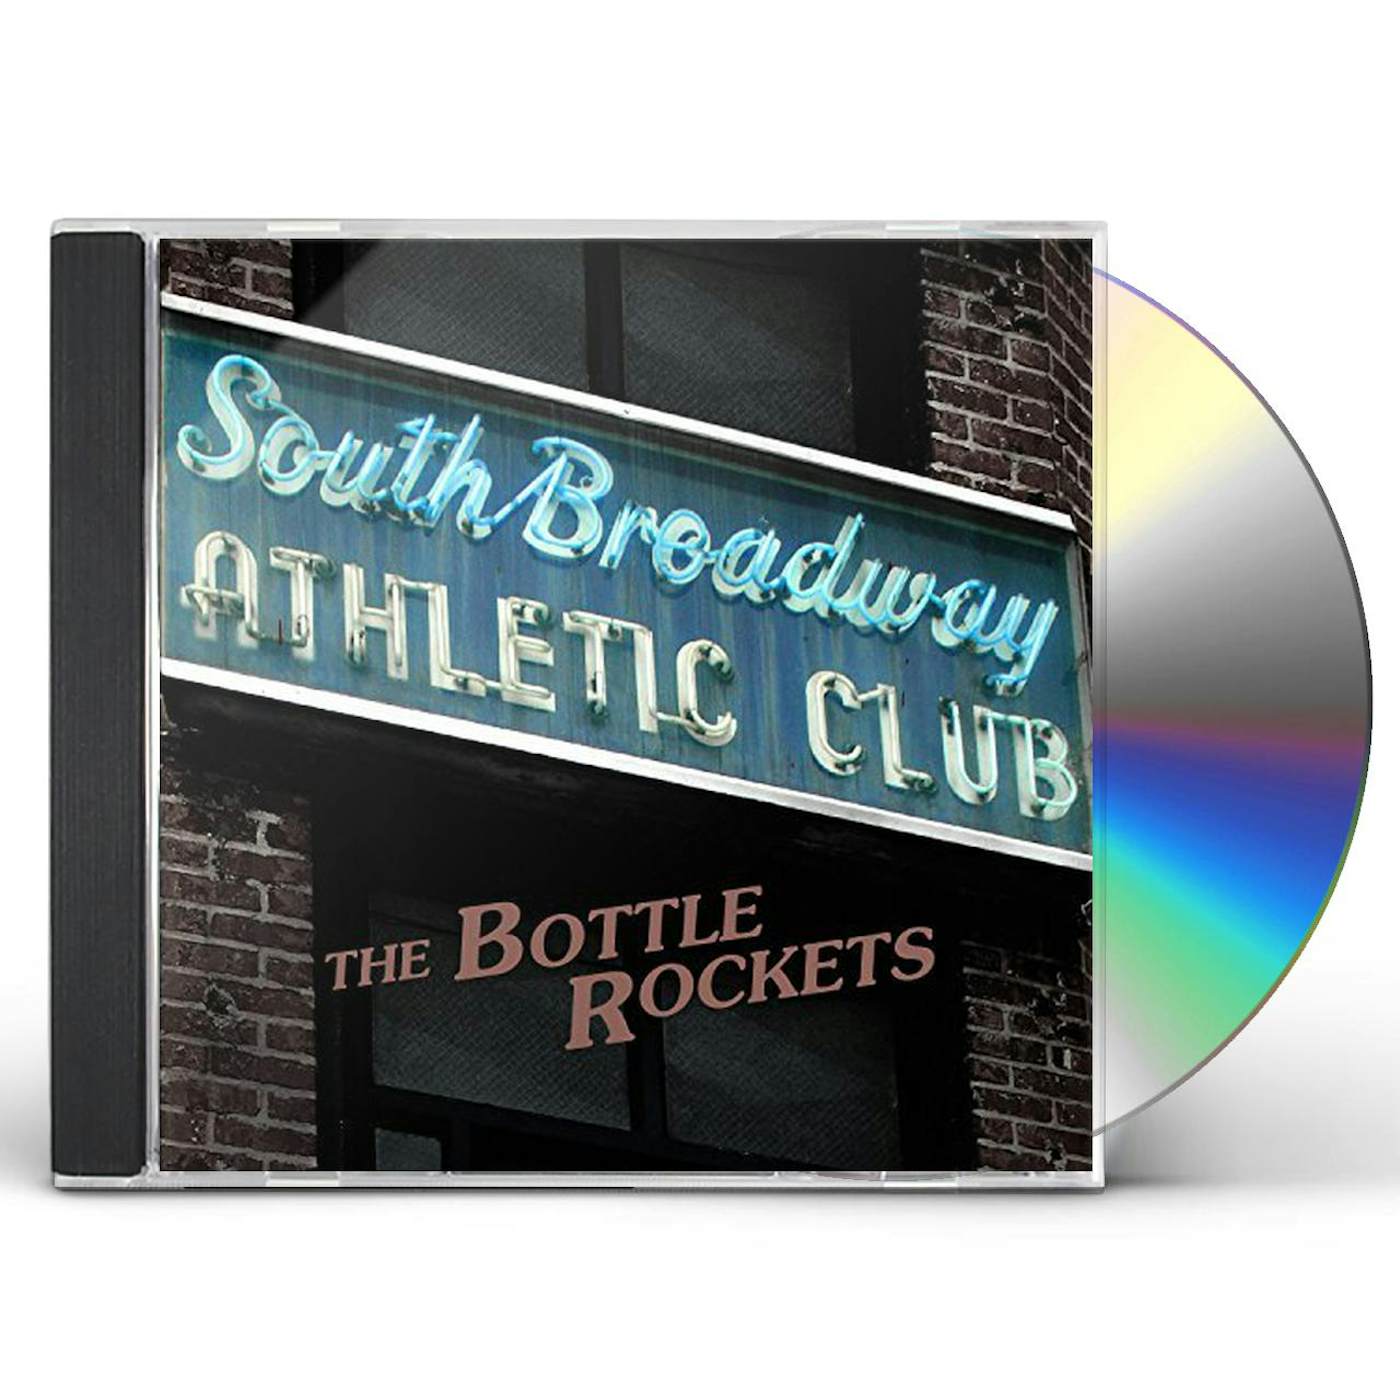 The Bottle Rockets SOUTH BROADWAY ATHLETIC CLUB CD